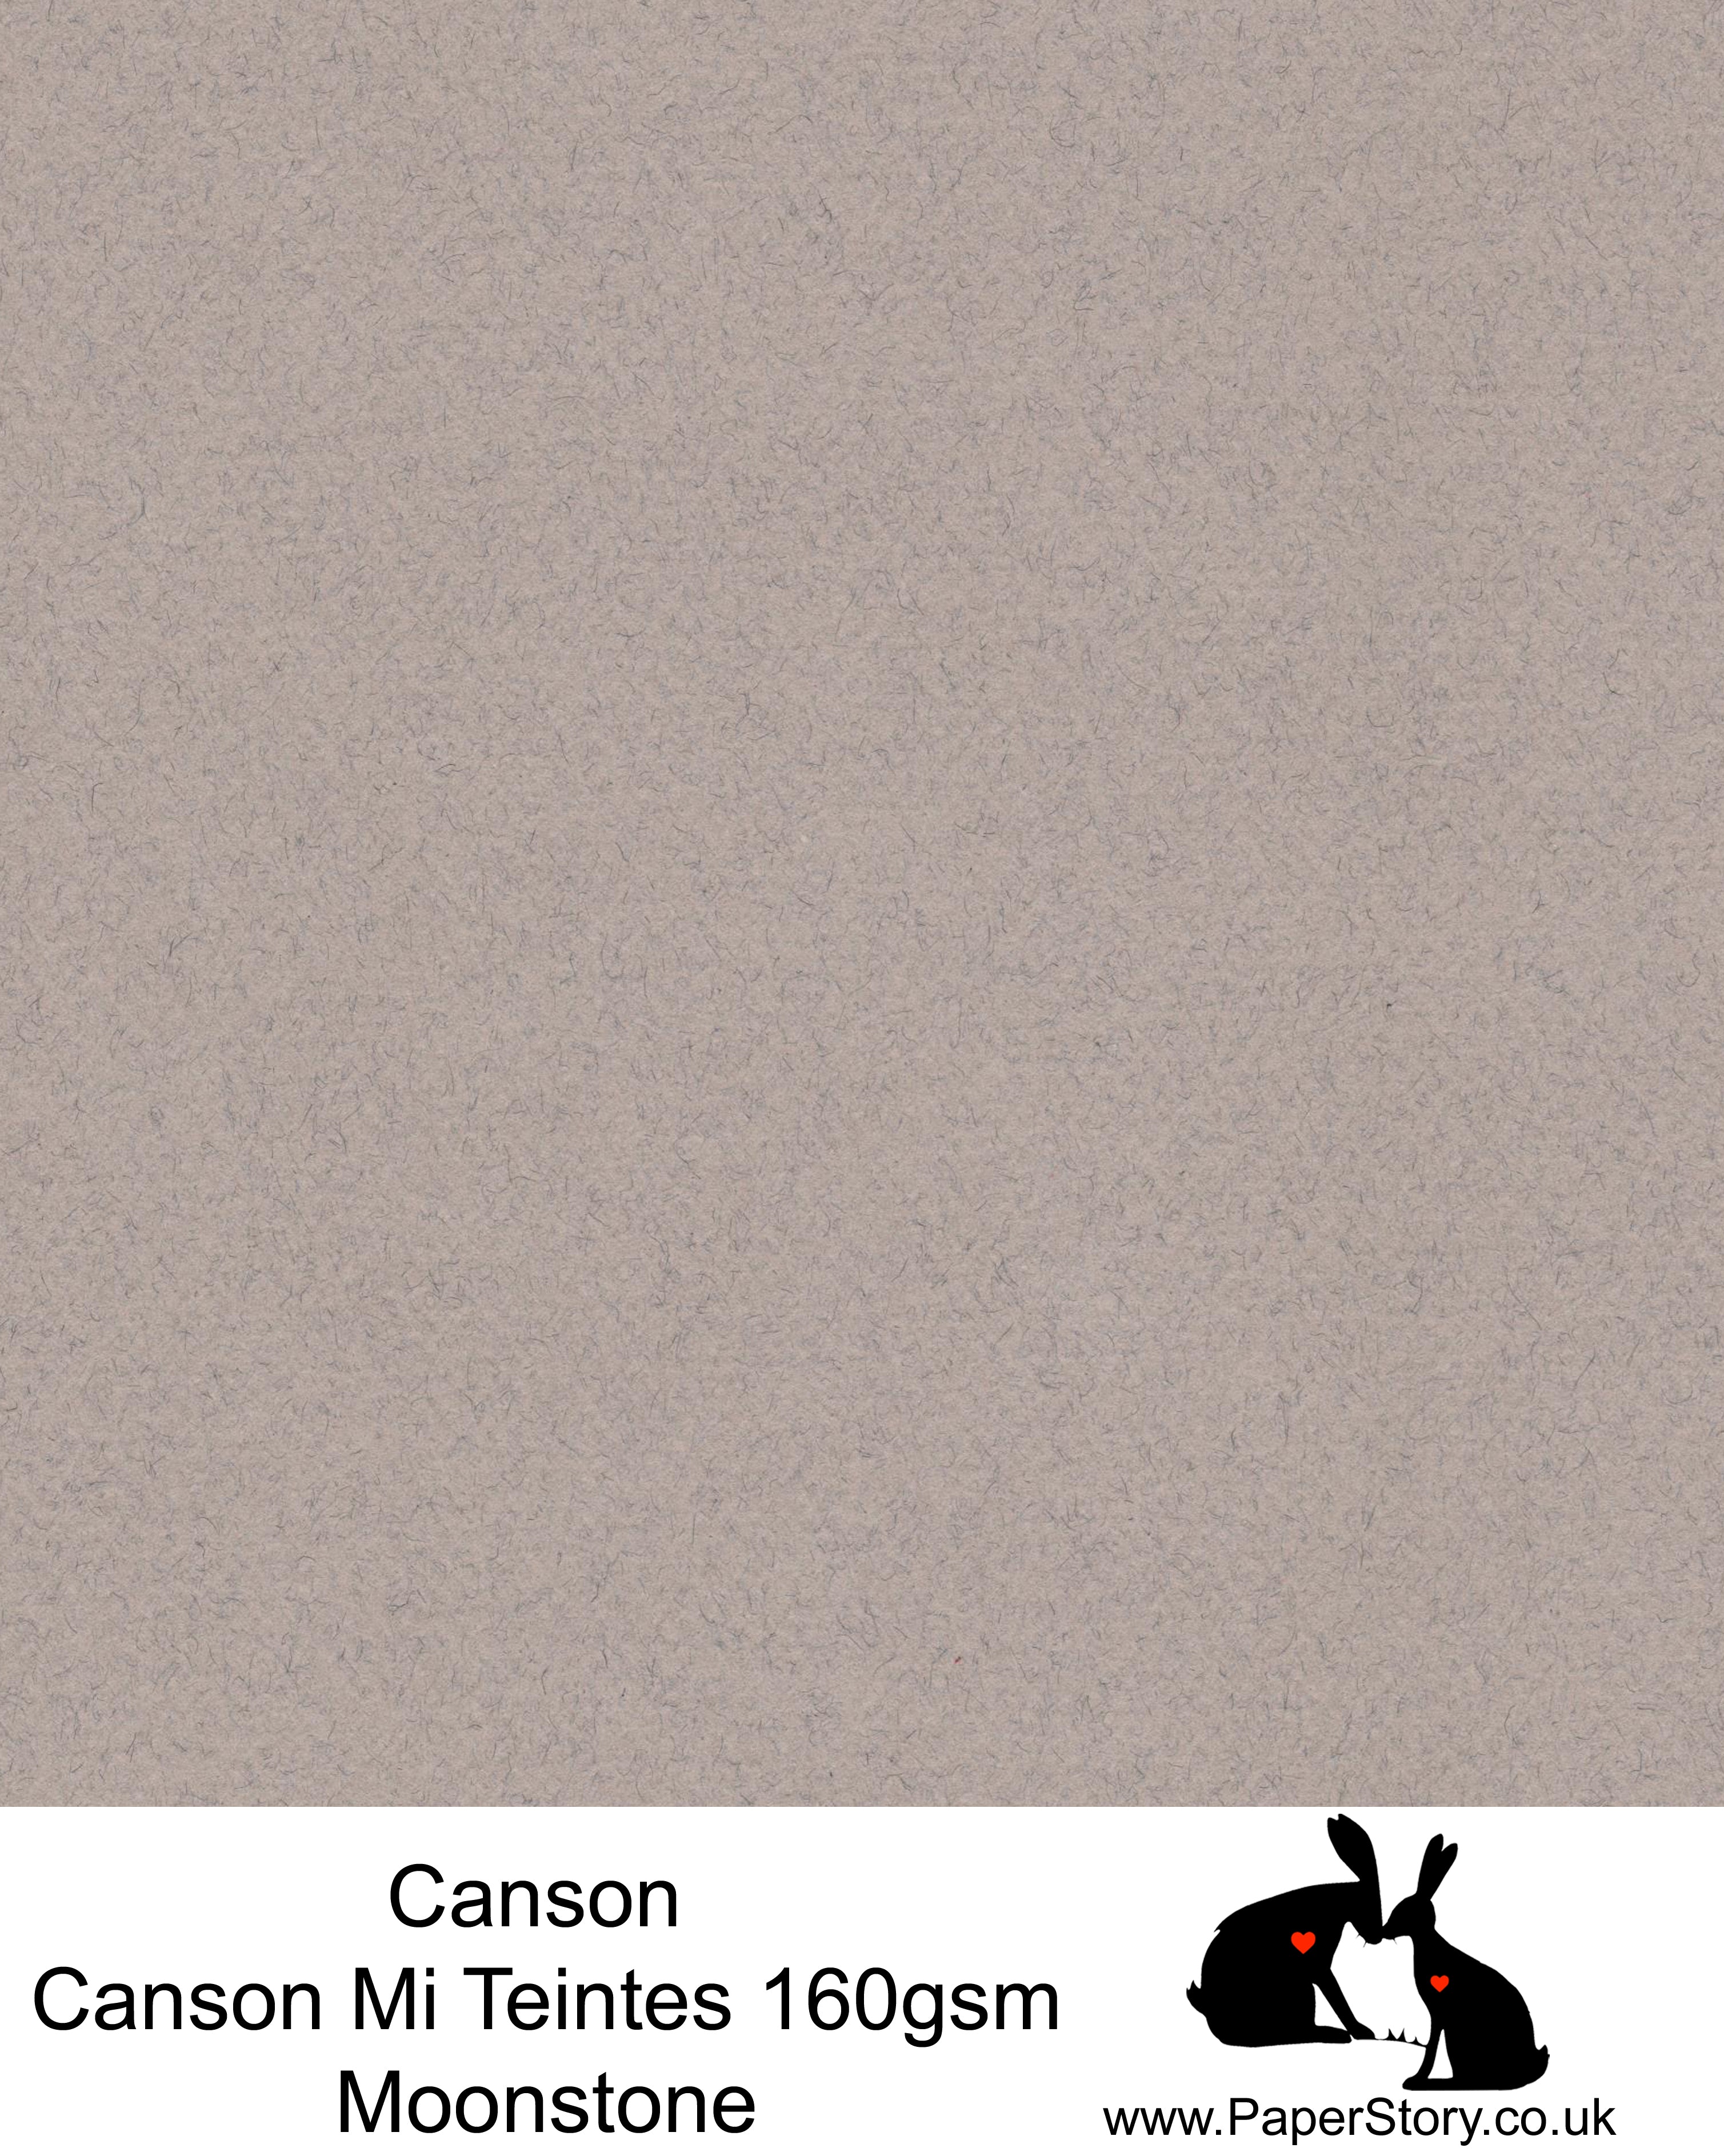 Canson Mi Teintes acid free,Felted warm Grey hammered texture honeycomb surface paper 160 gsm. This is a popular and classic paper for all artists especially well respected for Pastel  and Papercutting made famous by Paper Panda. This paper has a honeycombed finish one side and fine grain the other. An authentic art paper, acid free with a  very high 50% cotton content. Canson Mi-Teintes complies with the ISO 9706 standard on permanence, a guarantee of excellent conservation  